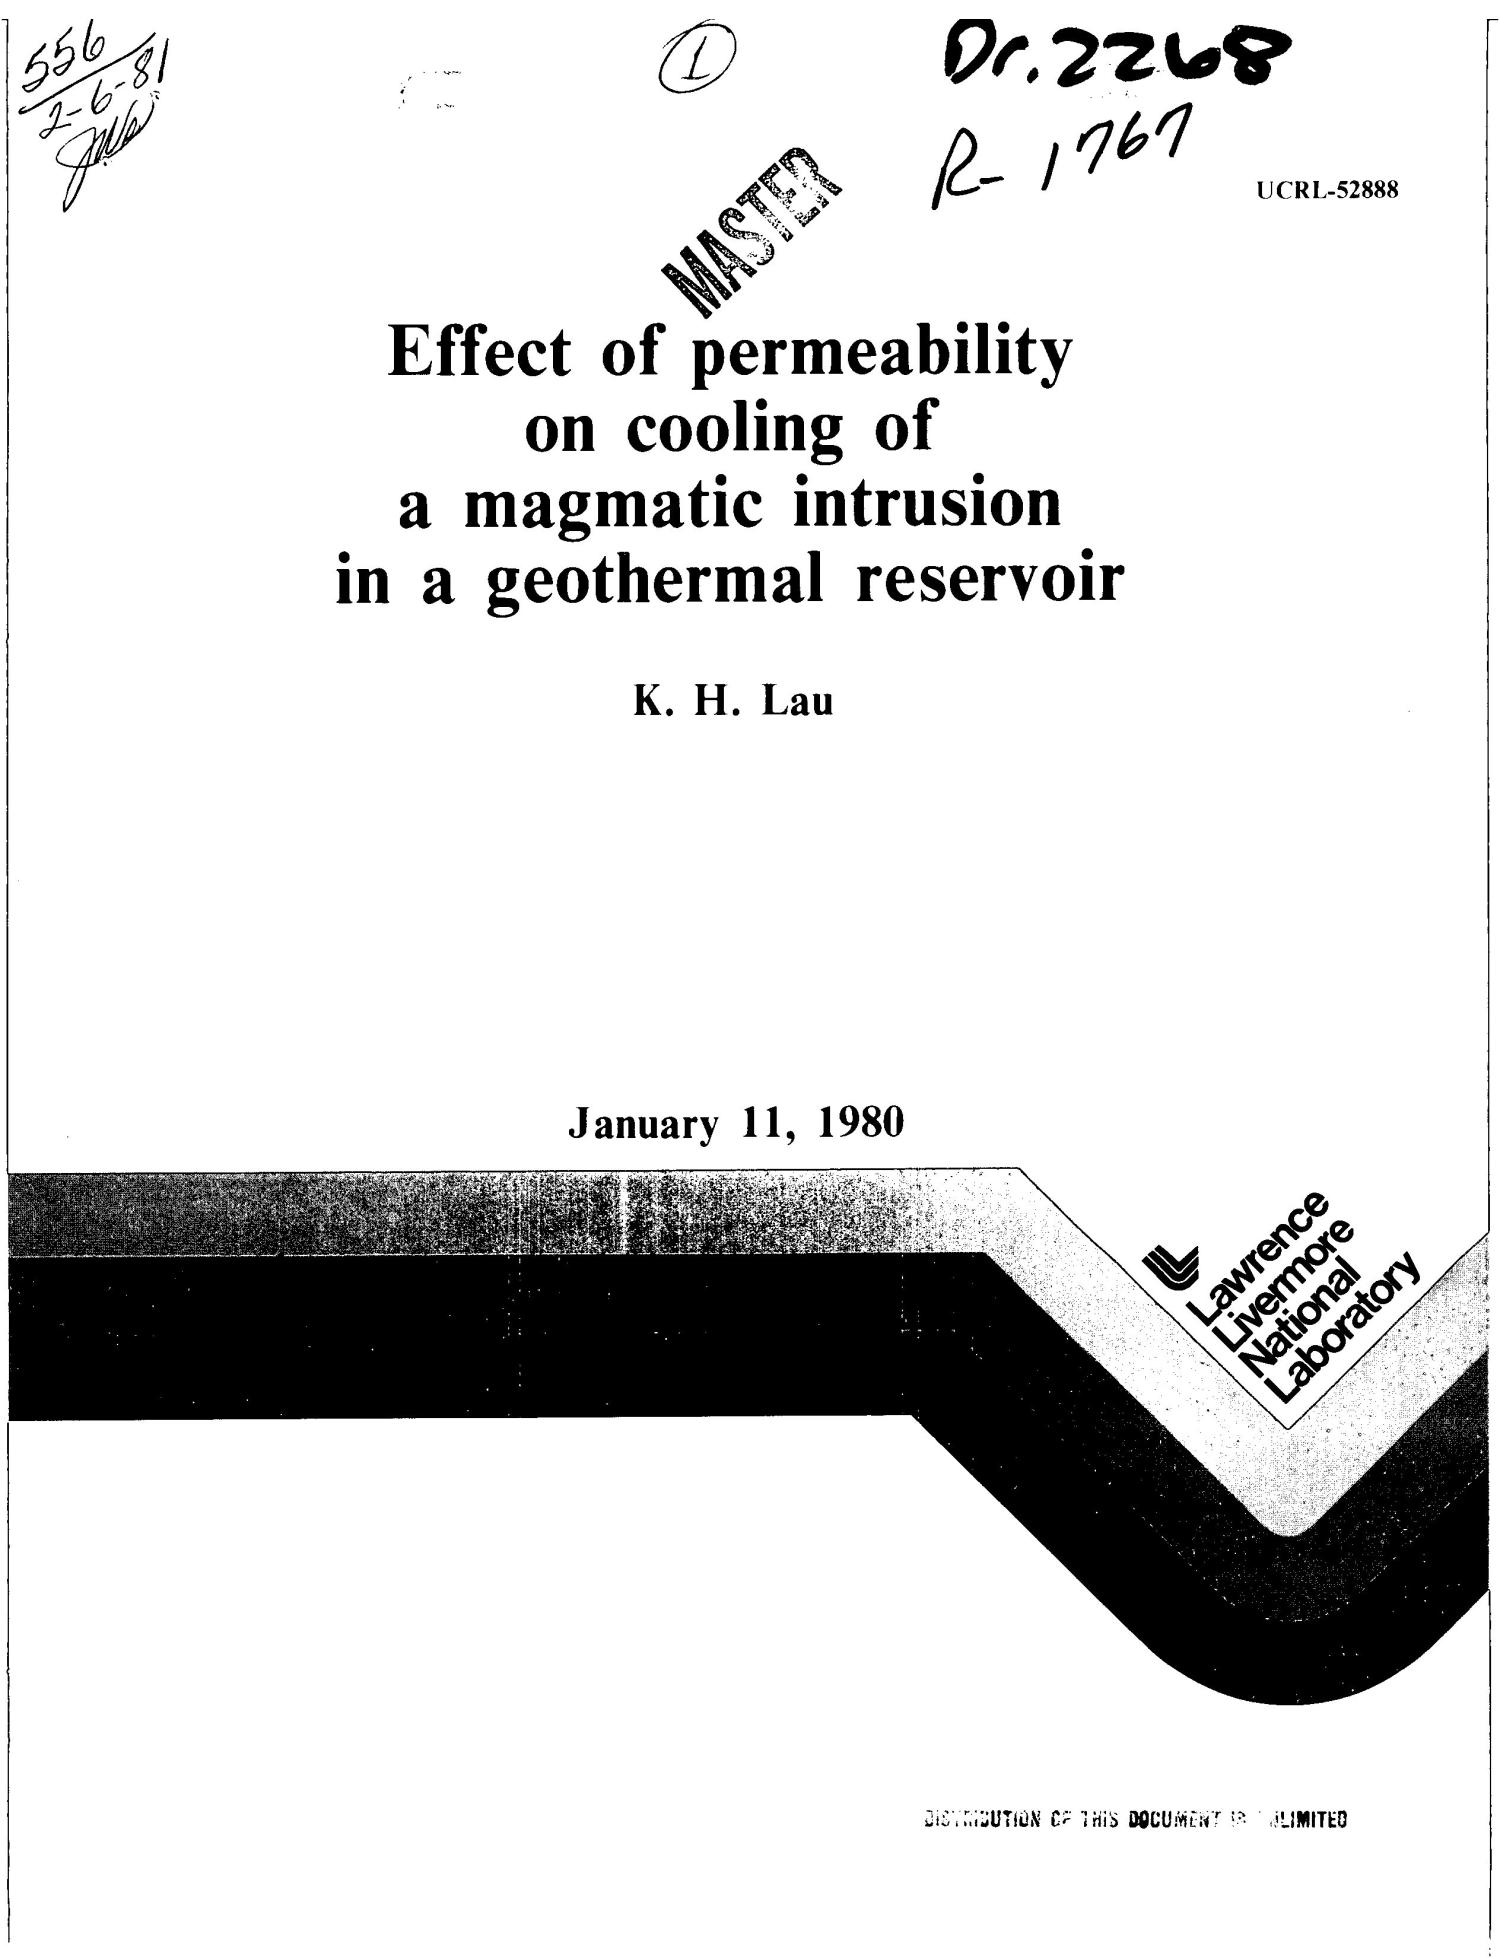 Effect of permeability on cooling of a magmatic intrusion in a